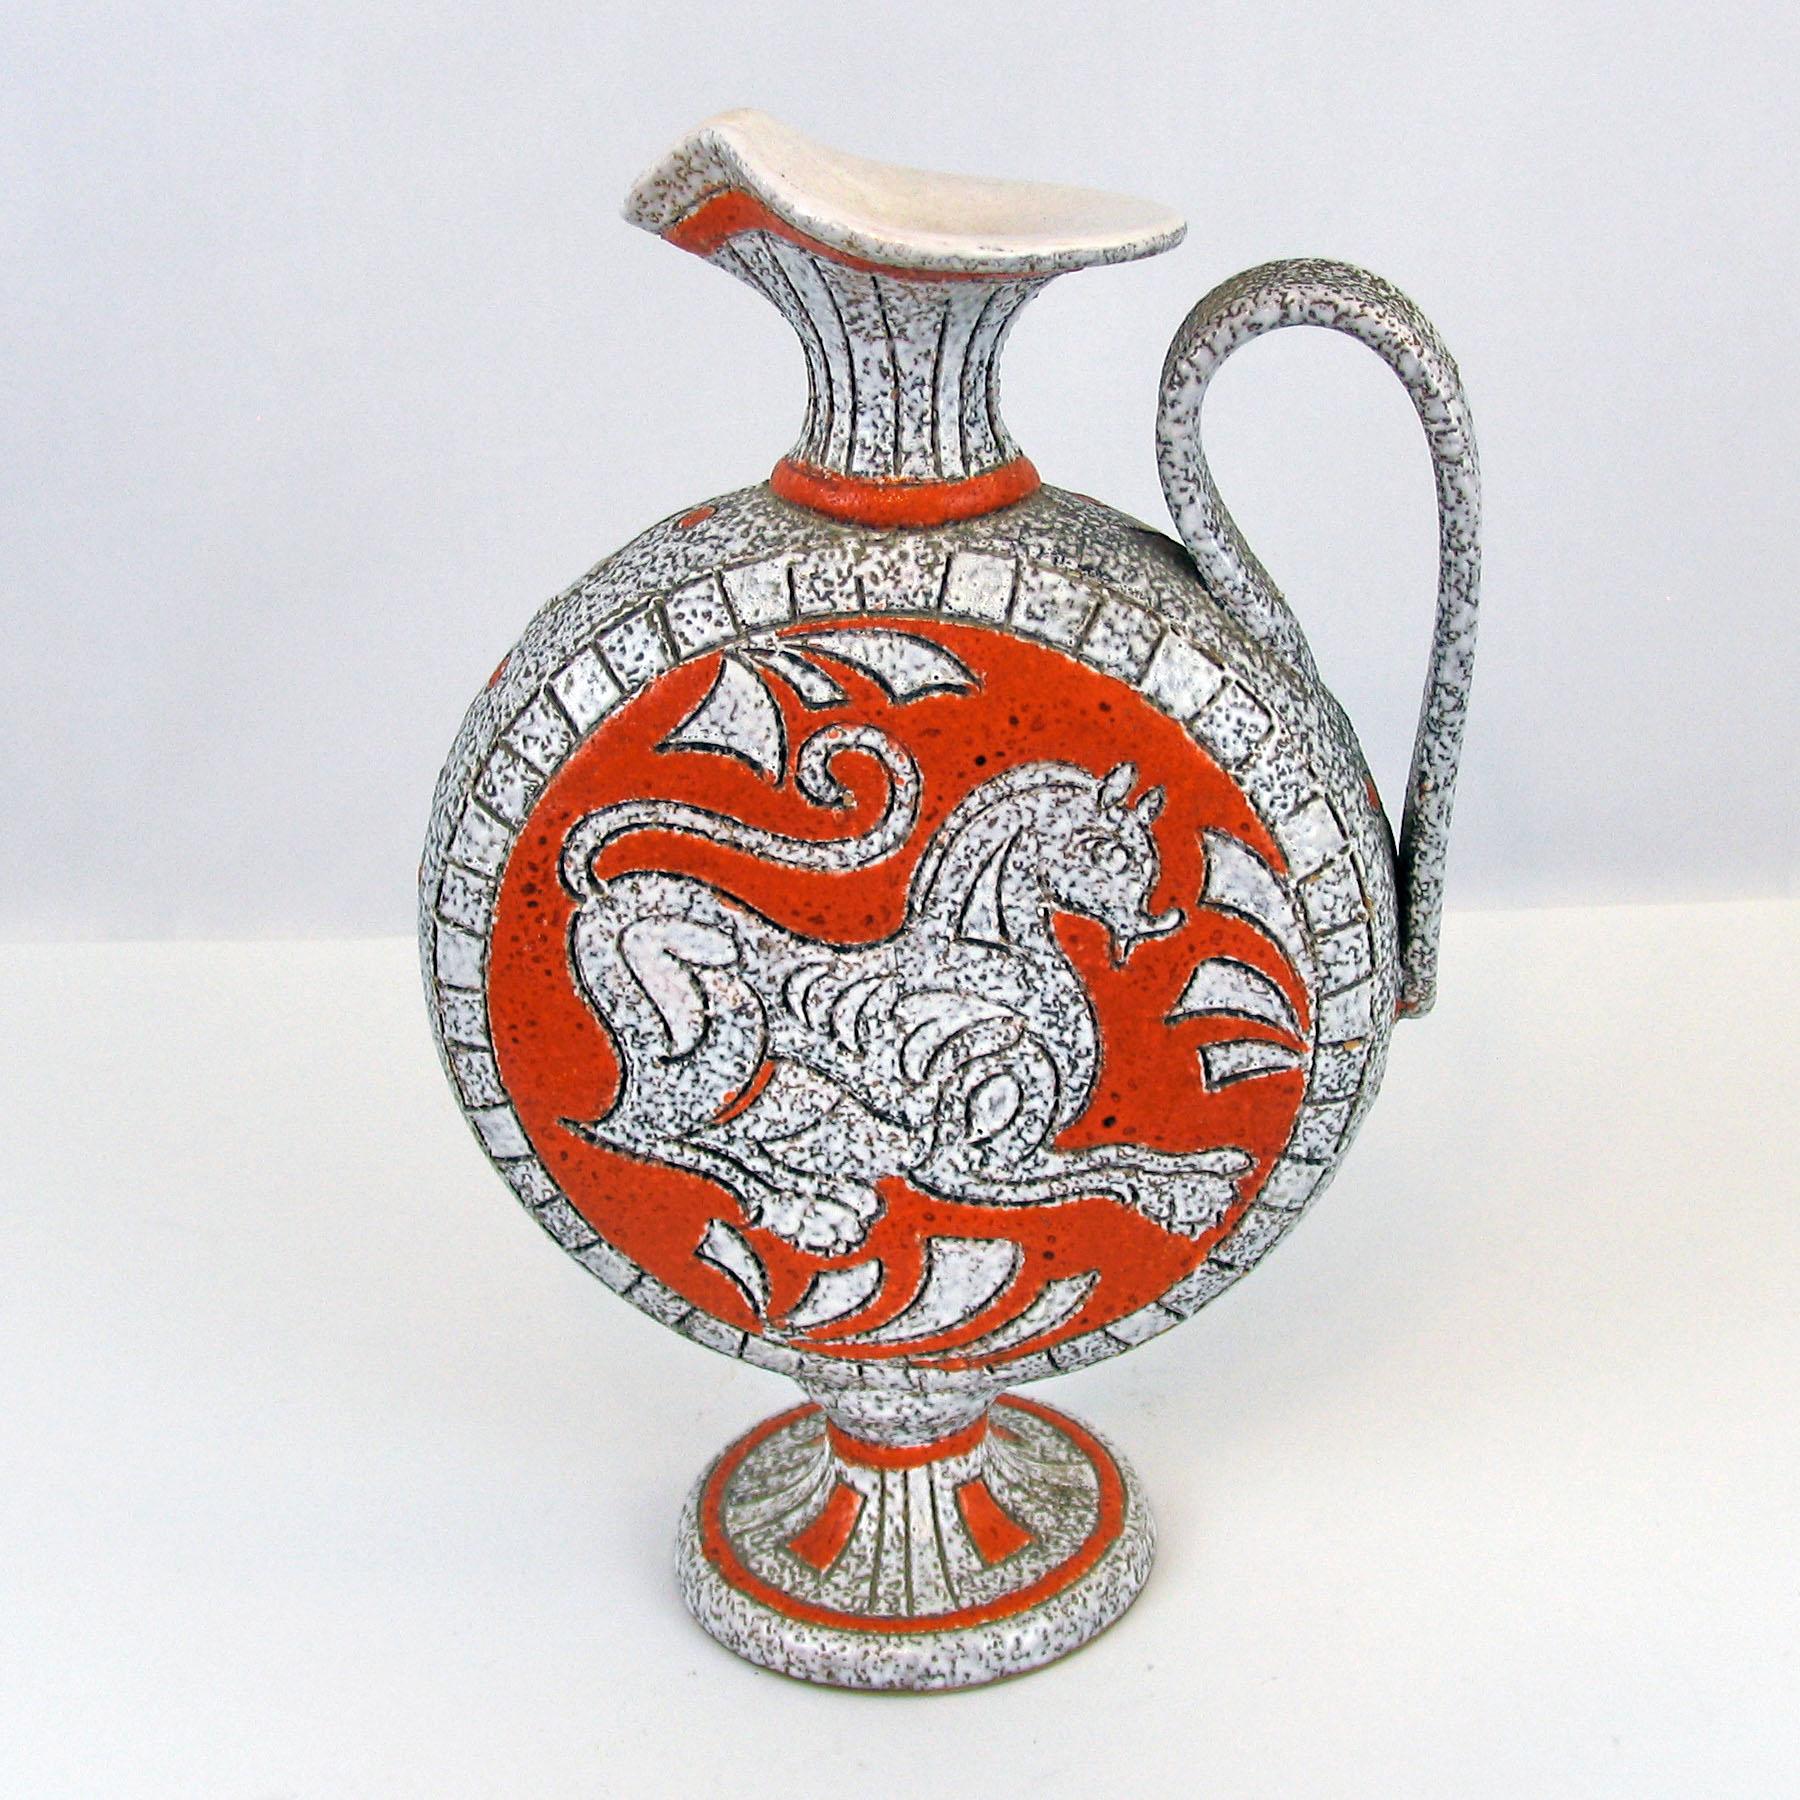 Beautiful pottery jug/handled vase, Italy late 1950s-1960s. Signed.

A stunning form and décor, body shaped as a jug, glossy white spray-glaze has a mottled texture, decorated using the sgraffito technique with motifs of Greek horse and leafage,